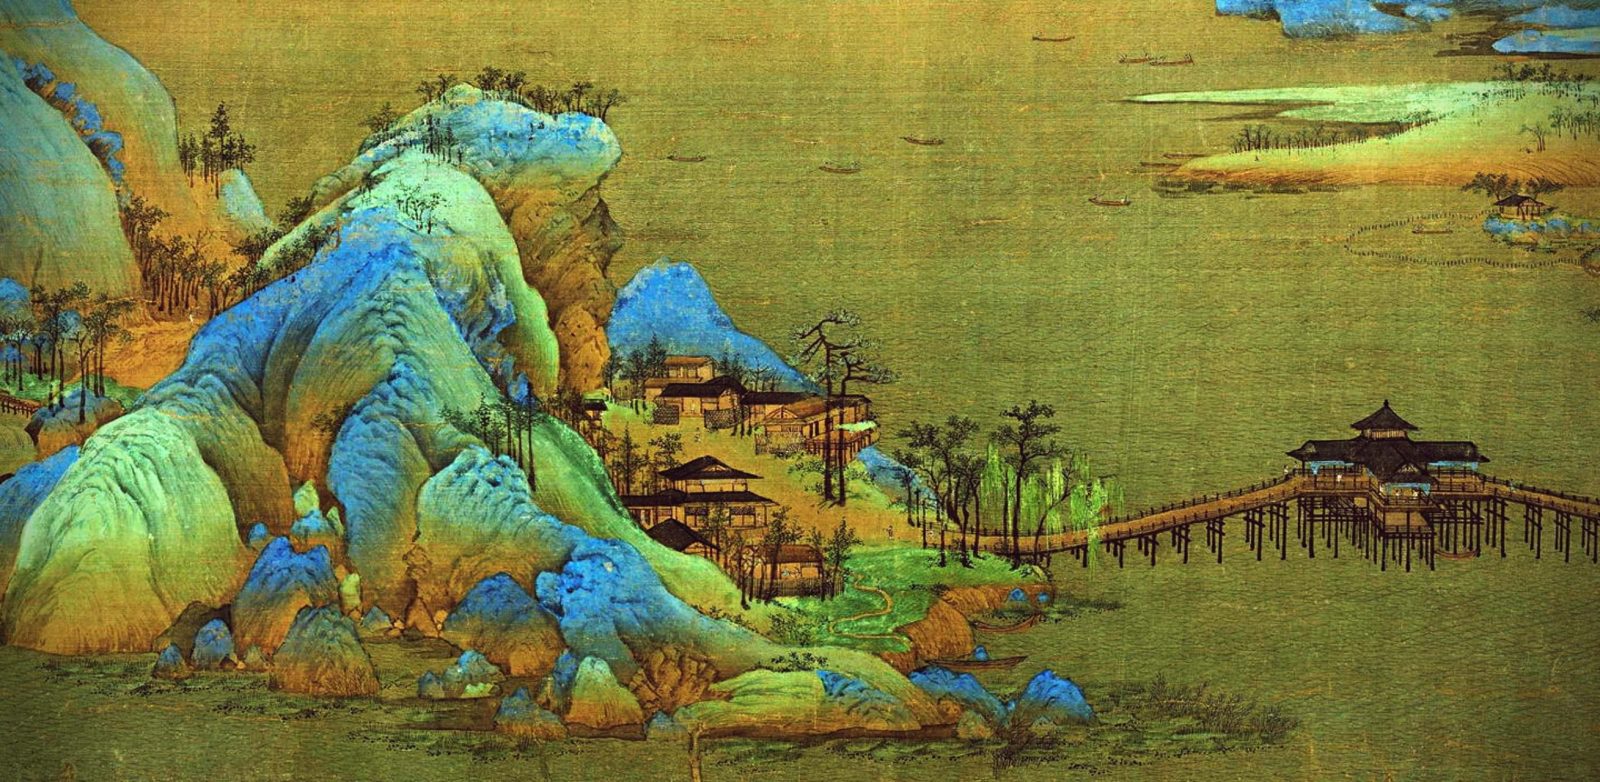 6.Wang Xi Meng Thousand Li Of Rivers And Mountains 1113 Handscroll Ink And Colors On Silk Palace Museum Beijing China. Lut3 1 Scaled 